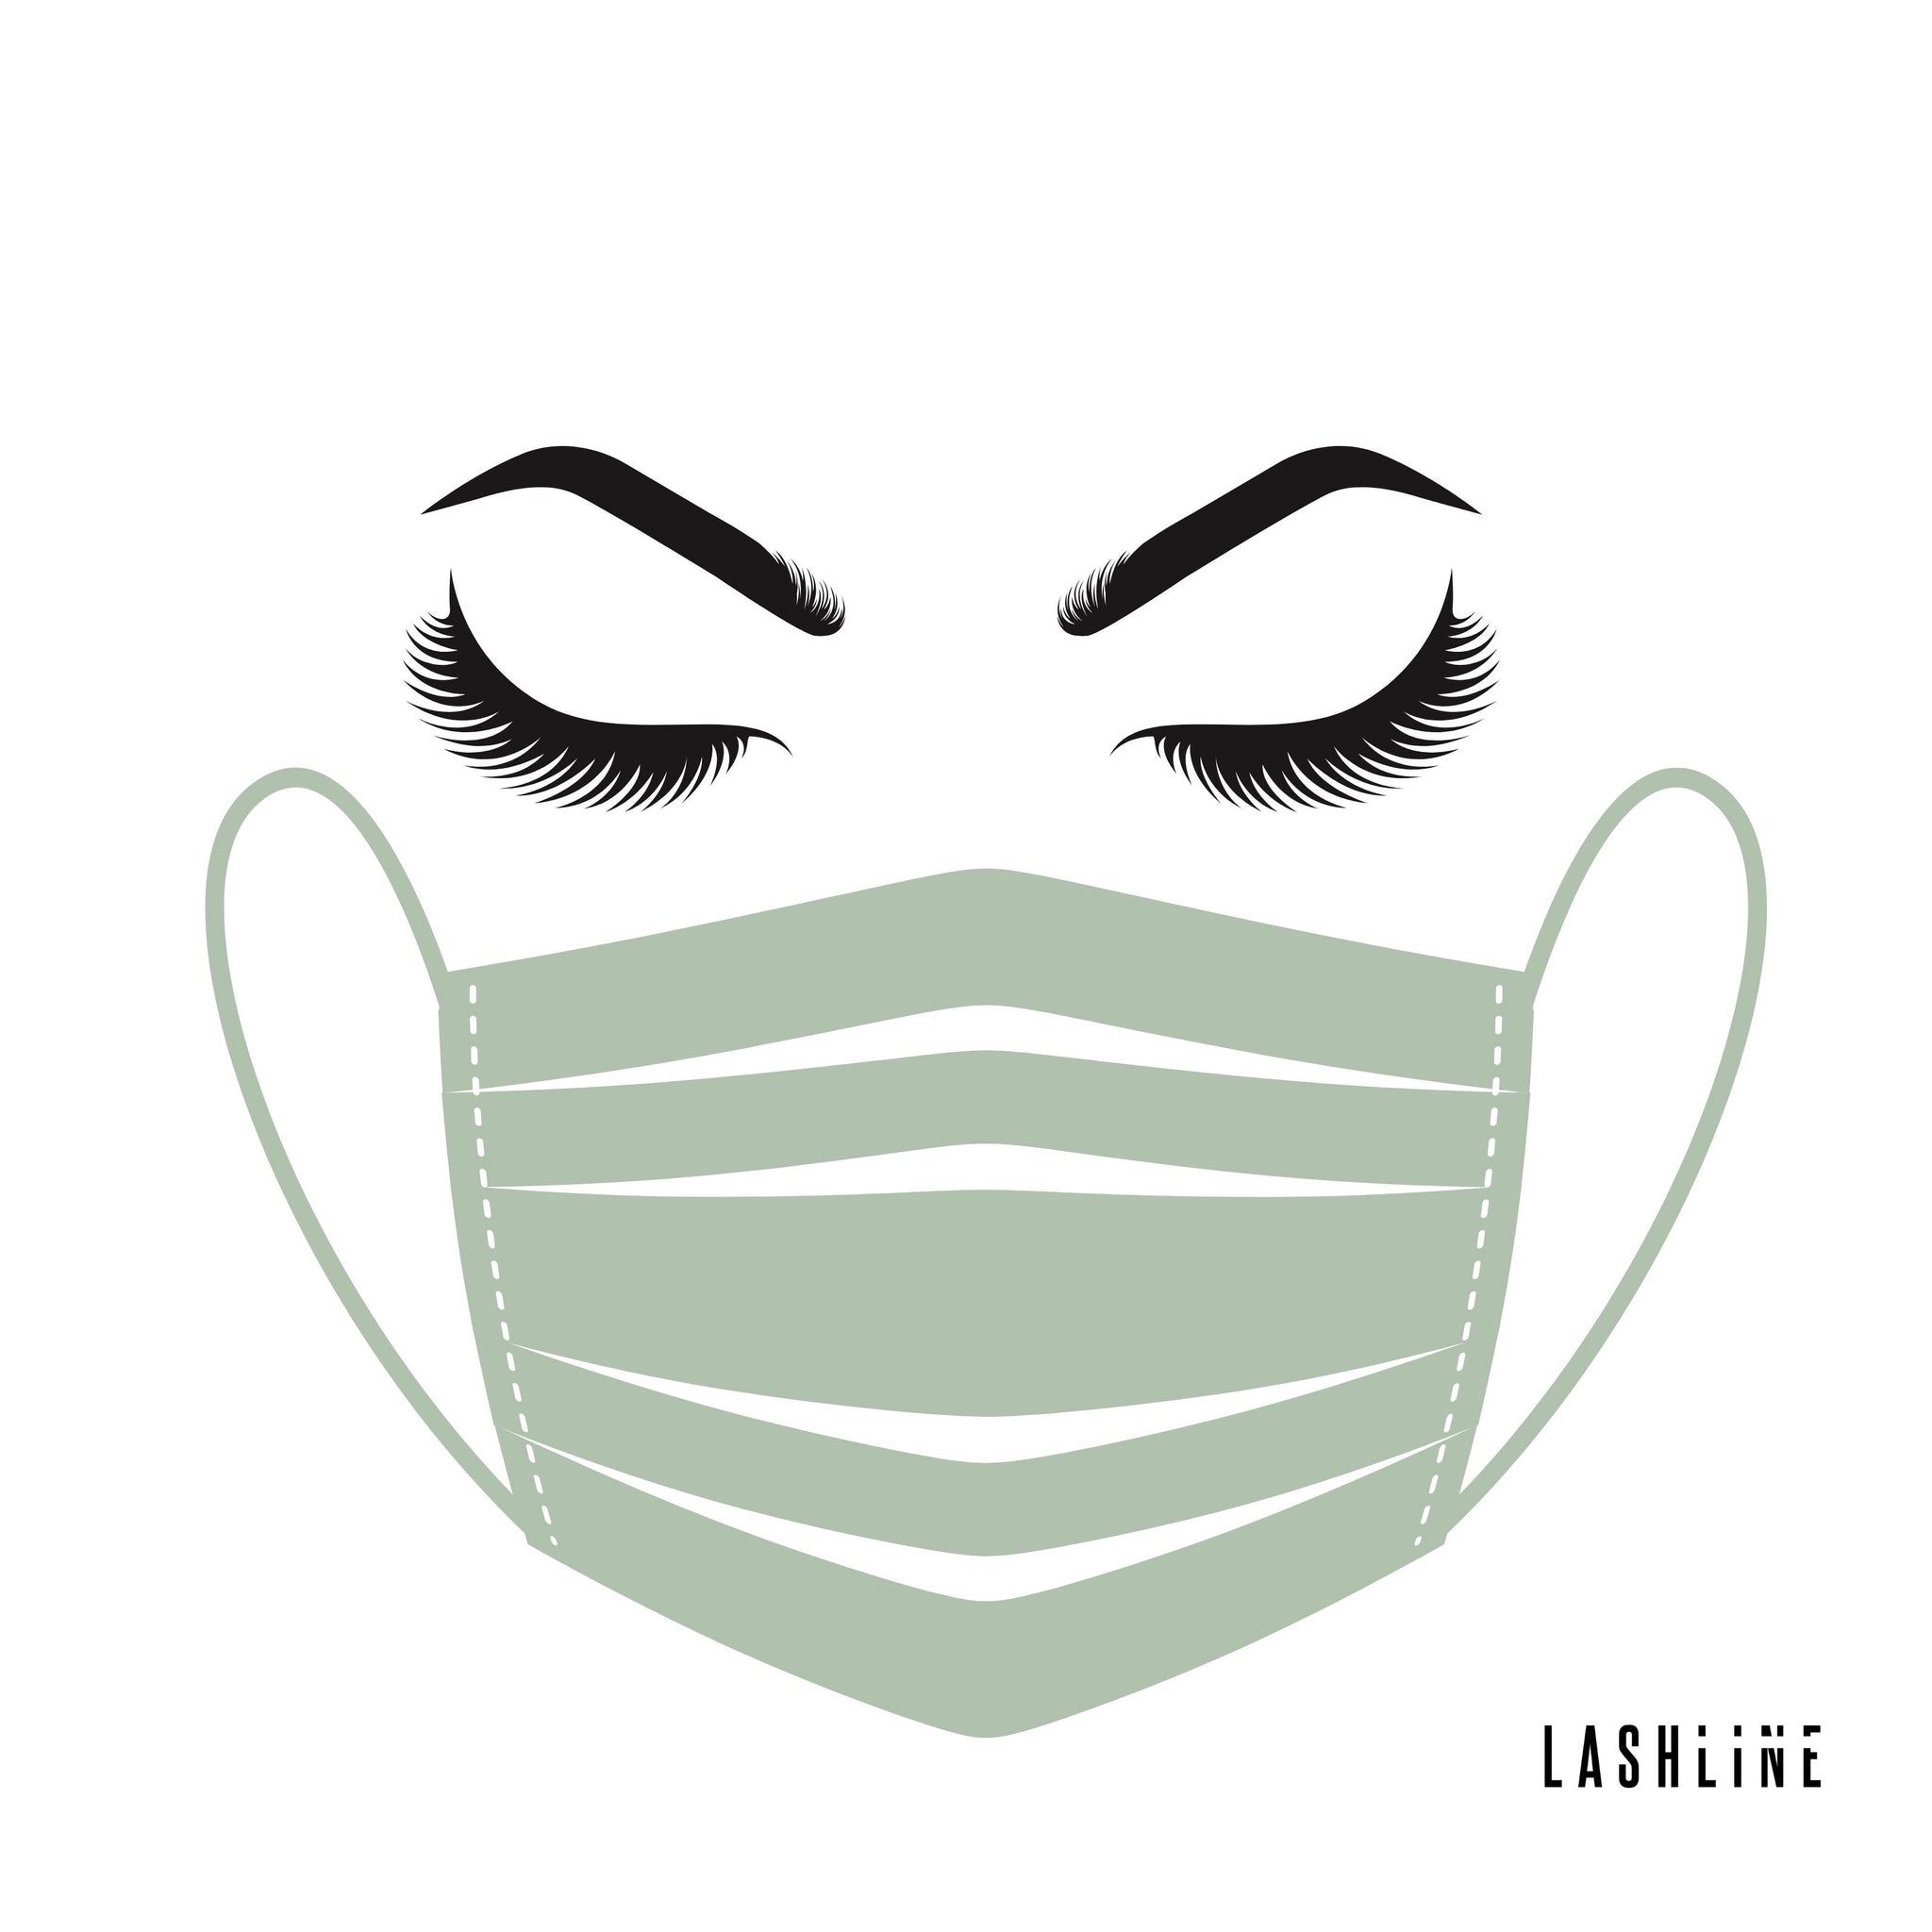 Illustration of eyebrows and volume lashes with a mask below